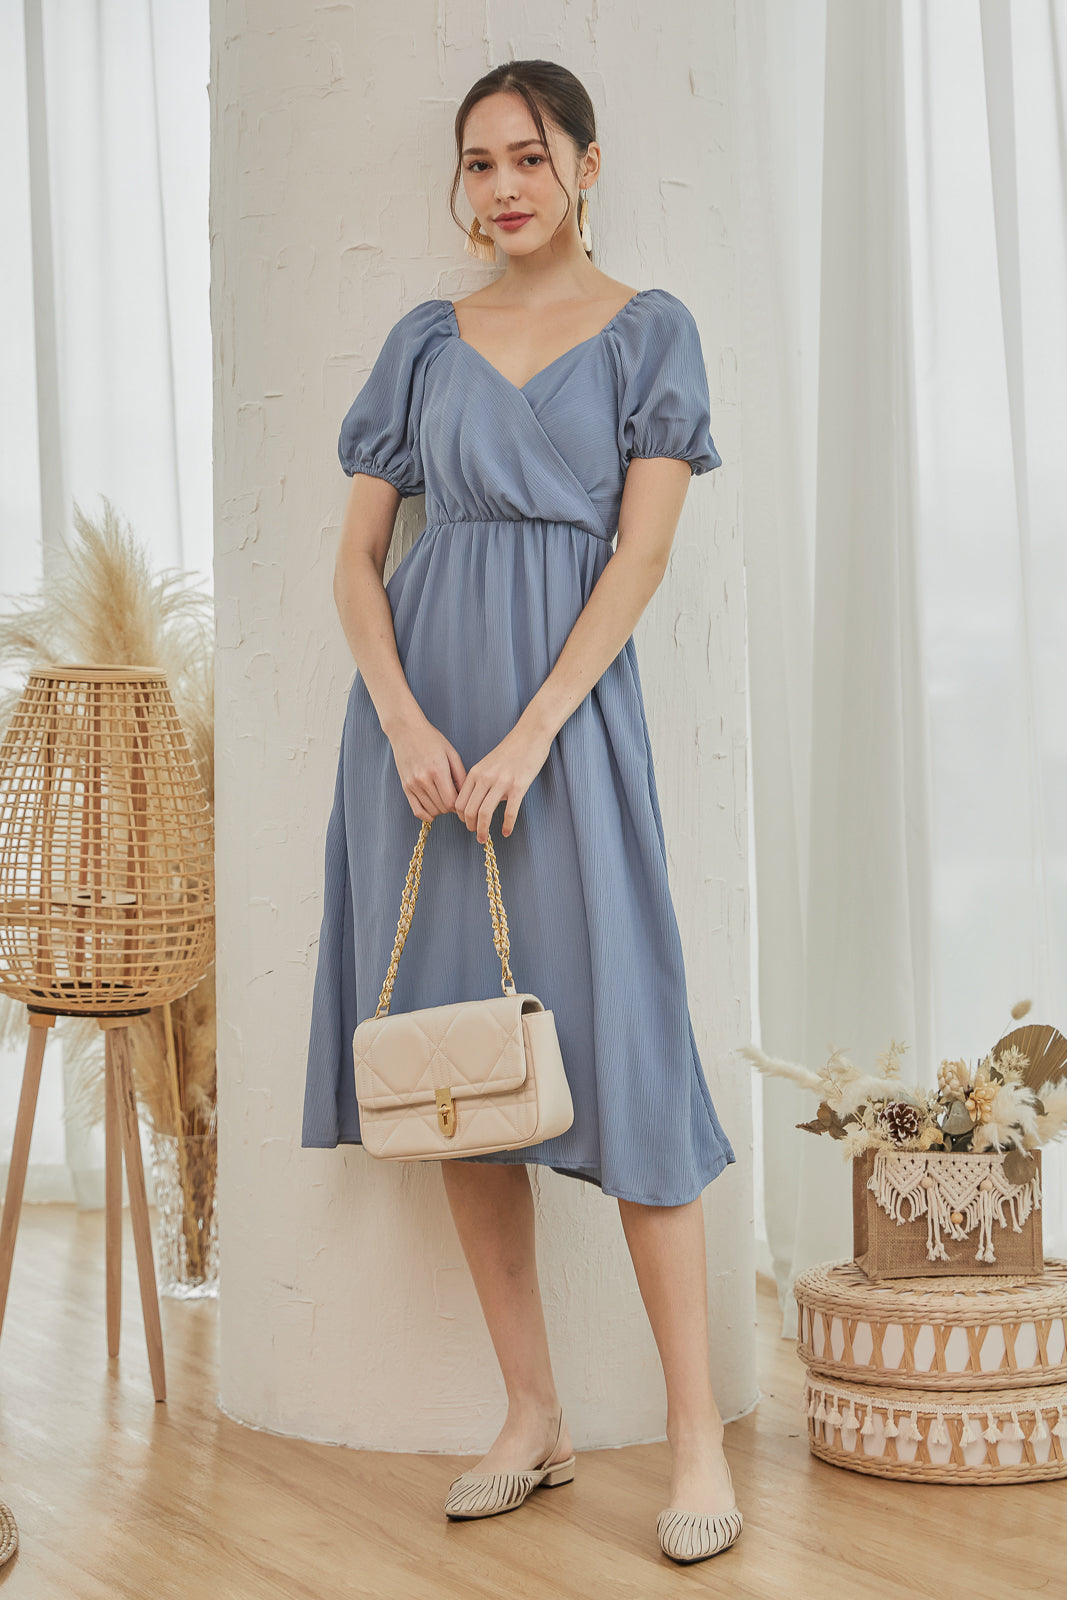 Encounter Crepe Textured Wrap Dress in Periwinkle